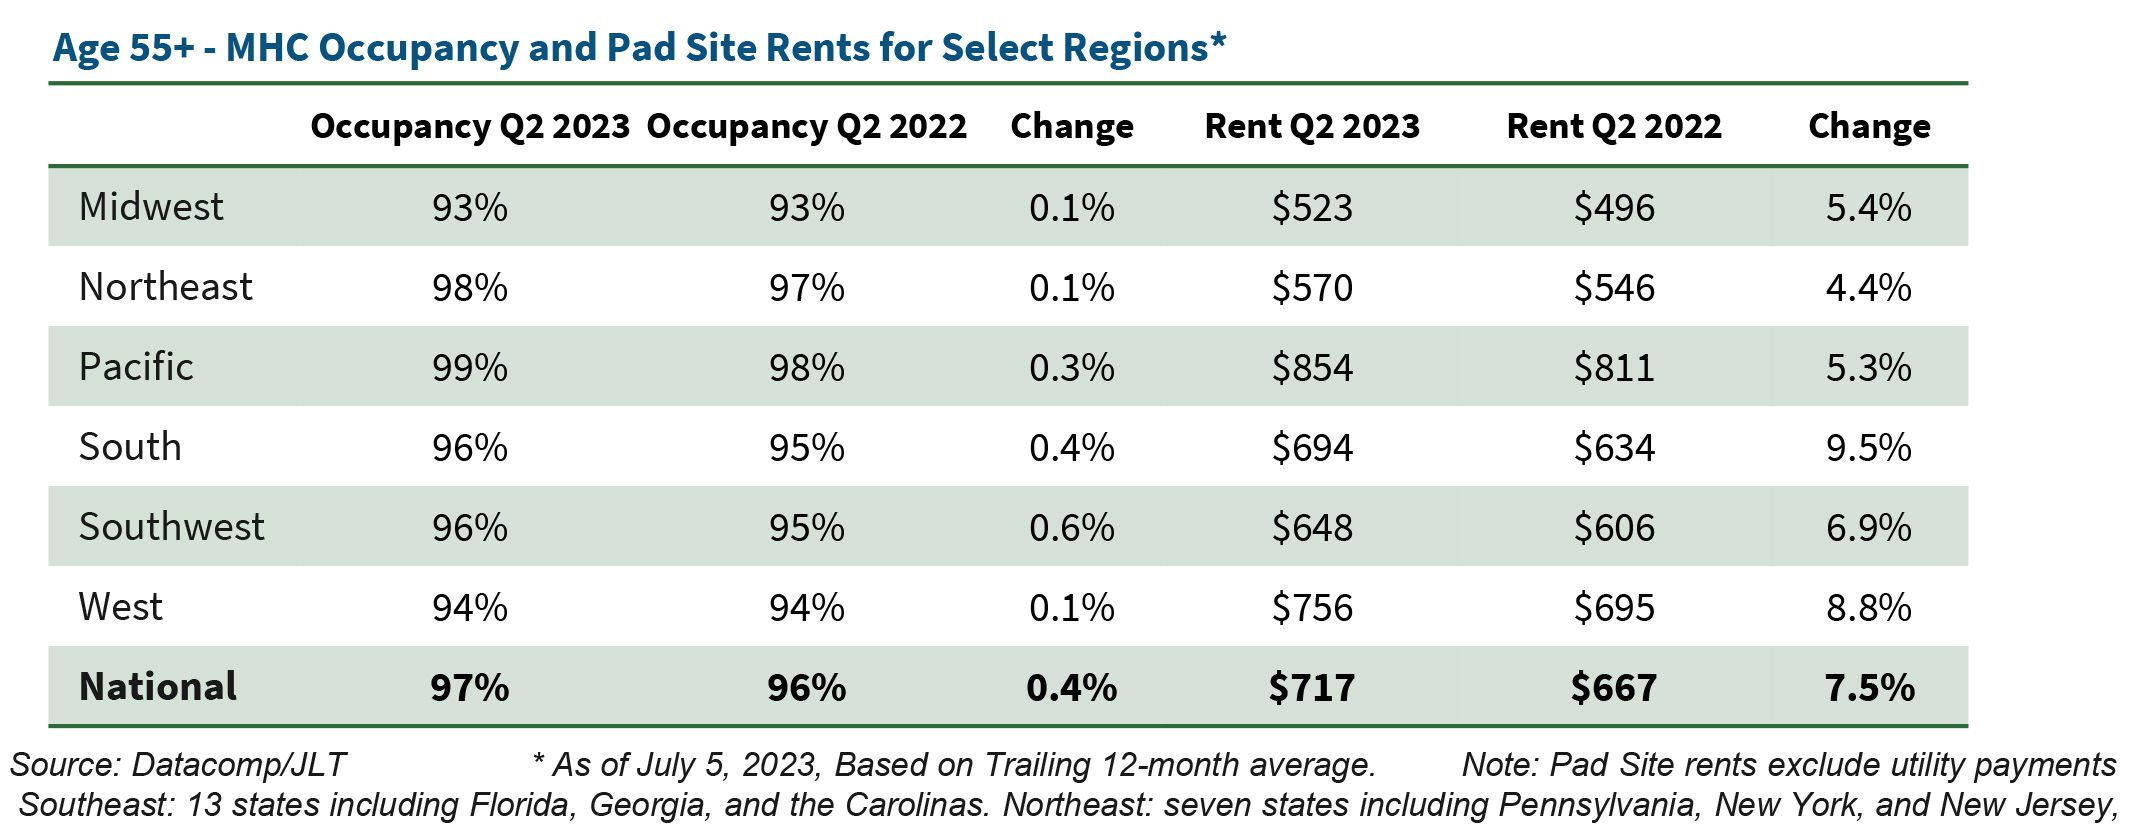 Age 55+ - MHC Occupancy and Pad Site Rents for Select Regions*